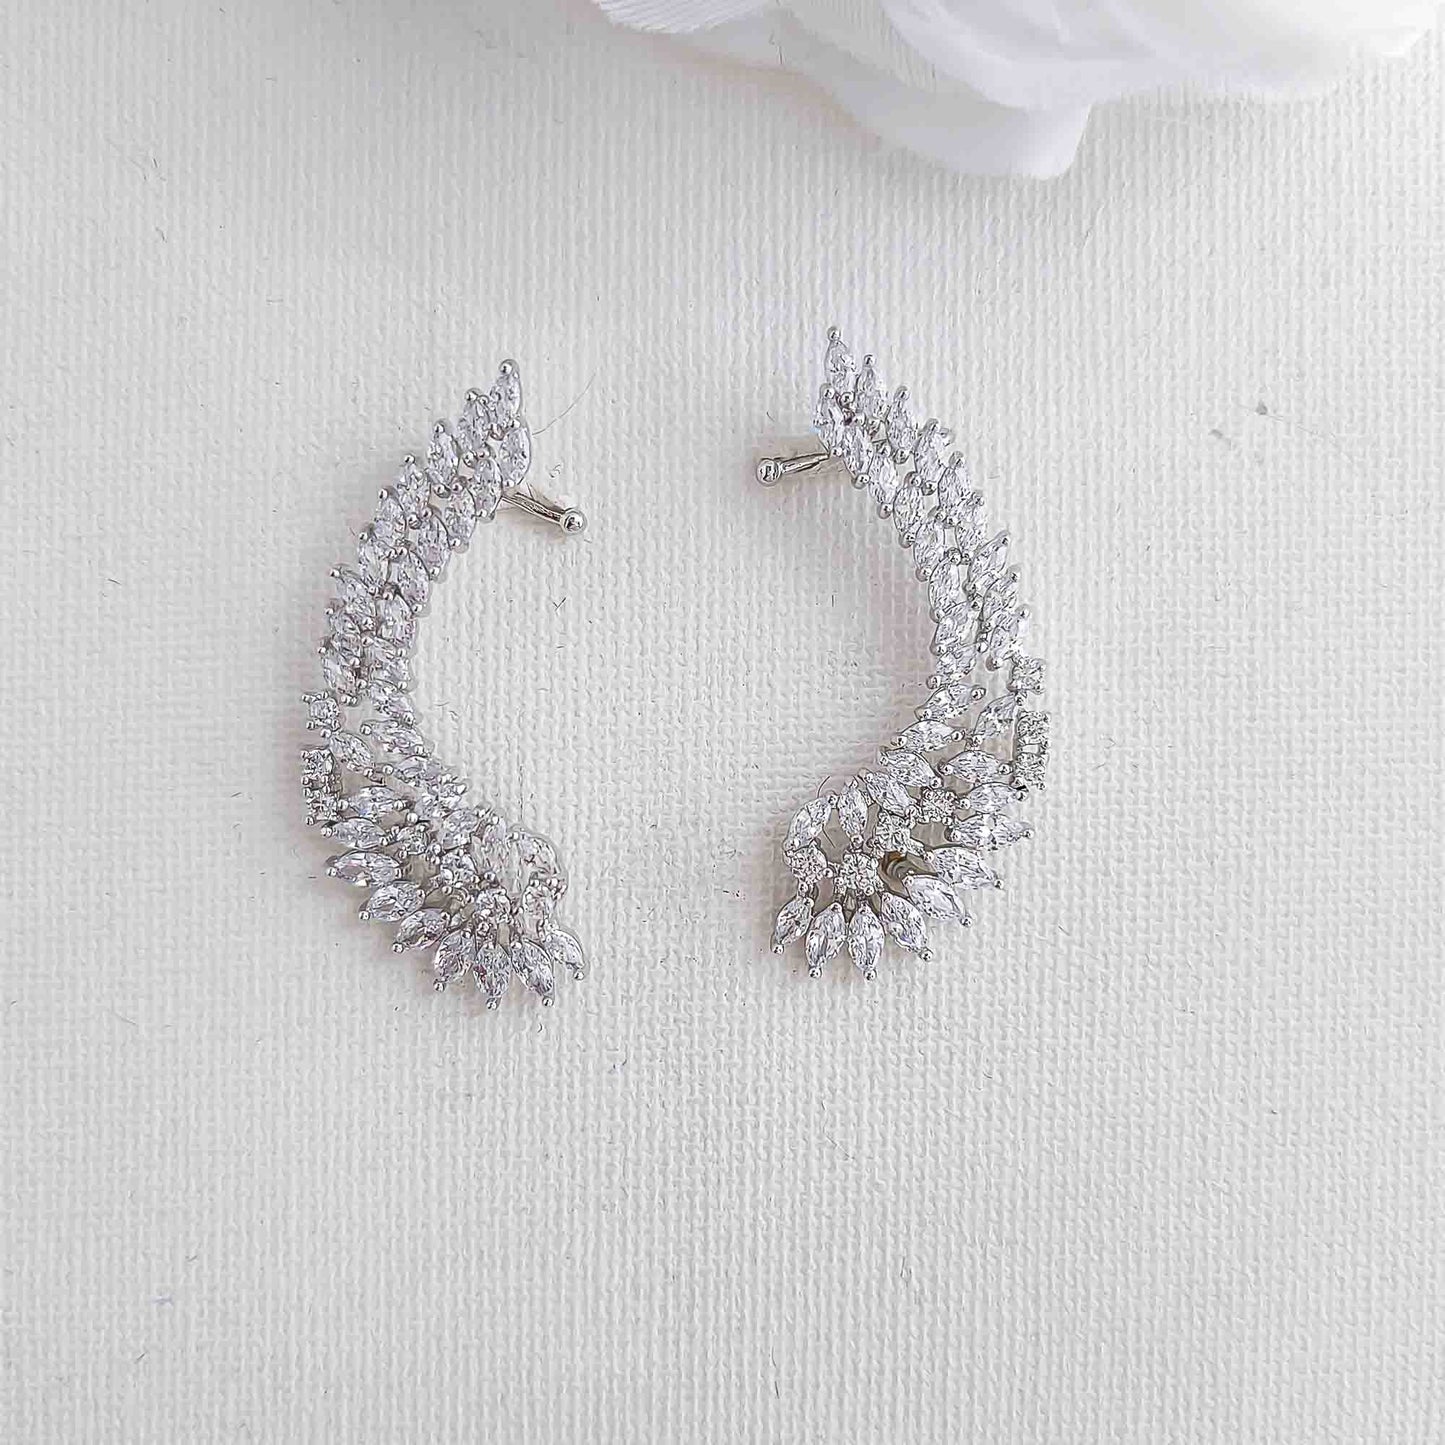 Ear Cuffs With or Without Pearl Drop-Adena